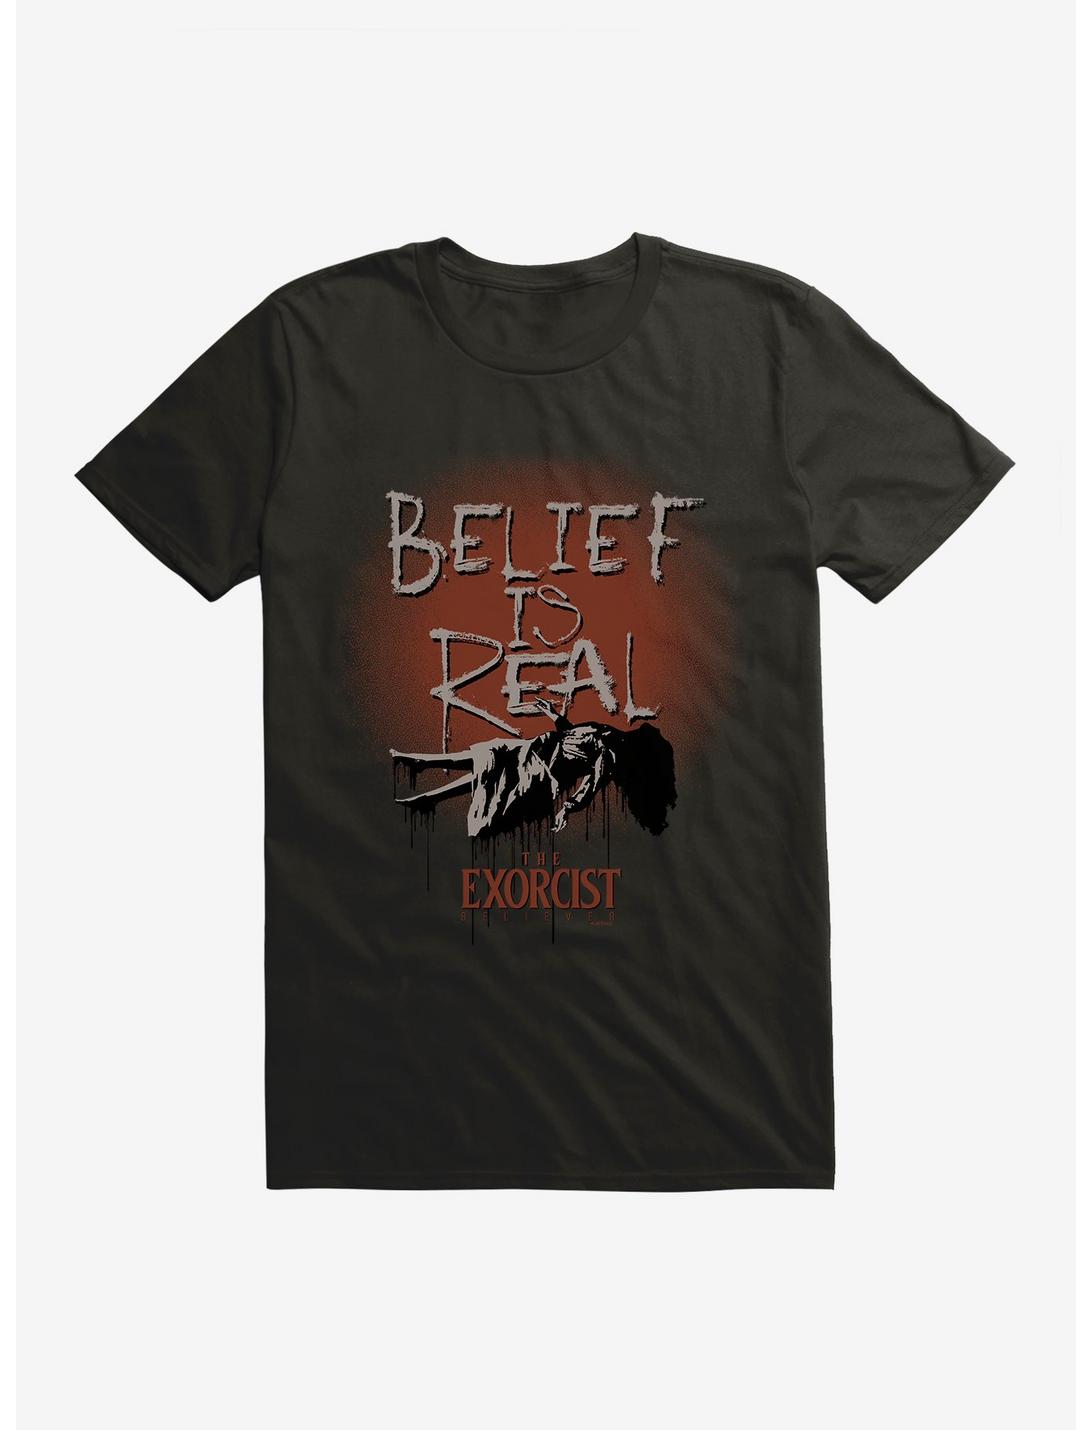 The Exorcist Believer Belief Is Real T-Shirt, BLACK, hi-res